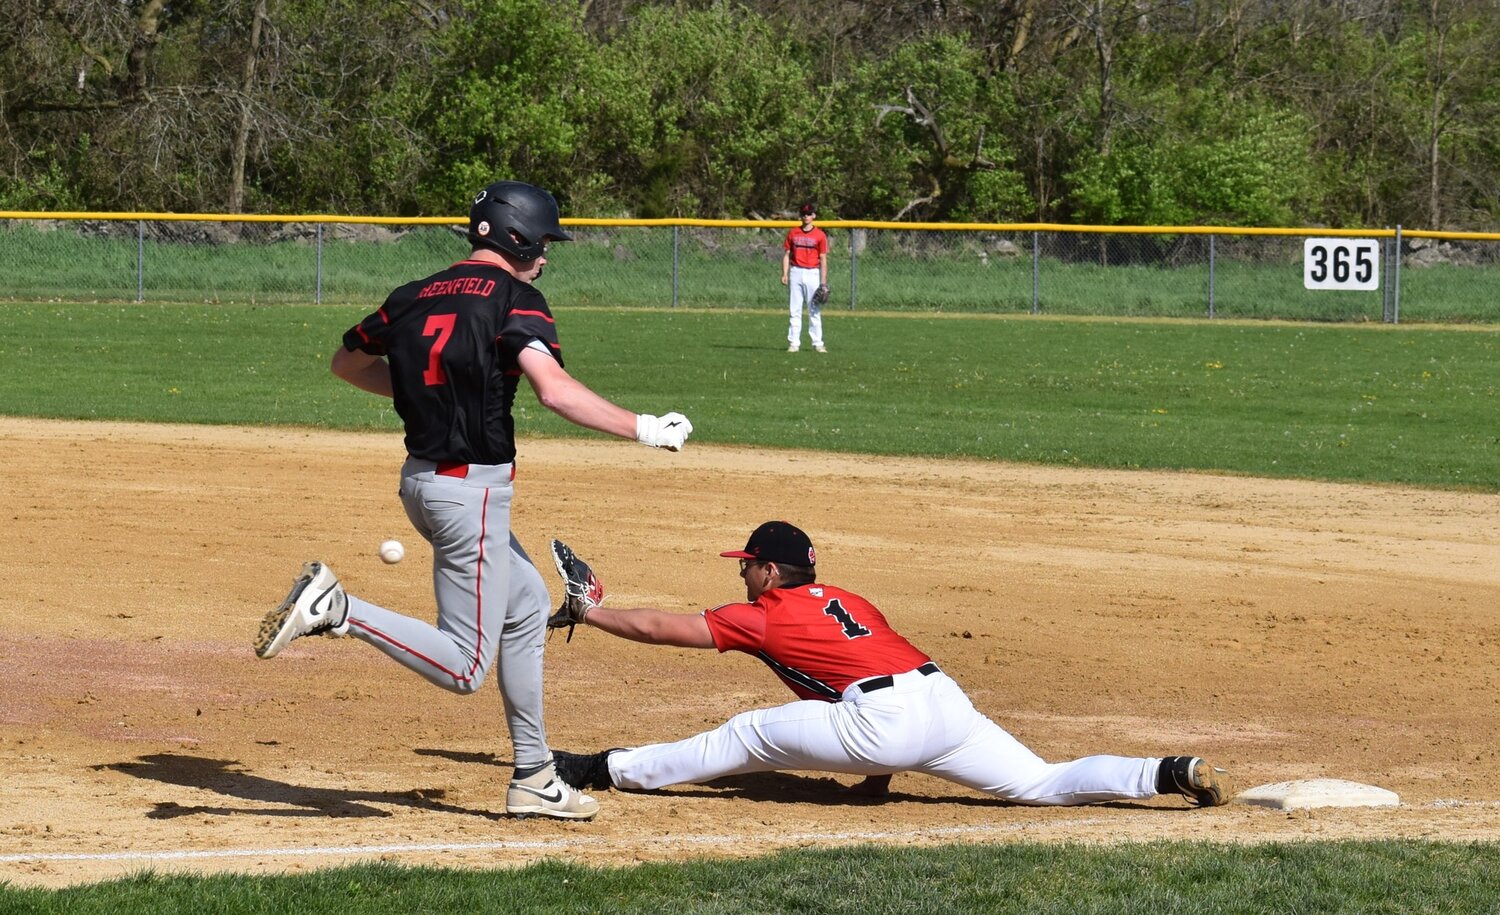 Amboy junior Dillon Merriman stretches for a grab at first base during a Northwest Upstate Illini Conference game against Forreston on Monday, April 29. The Clippers fell 12-3 after holding a 3-0 lead in the second inning.